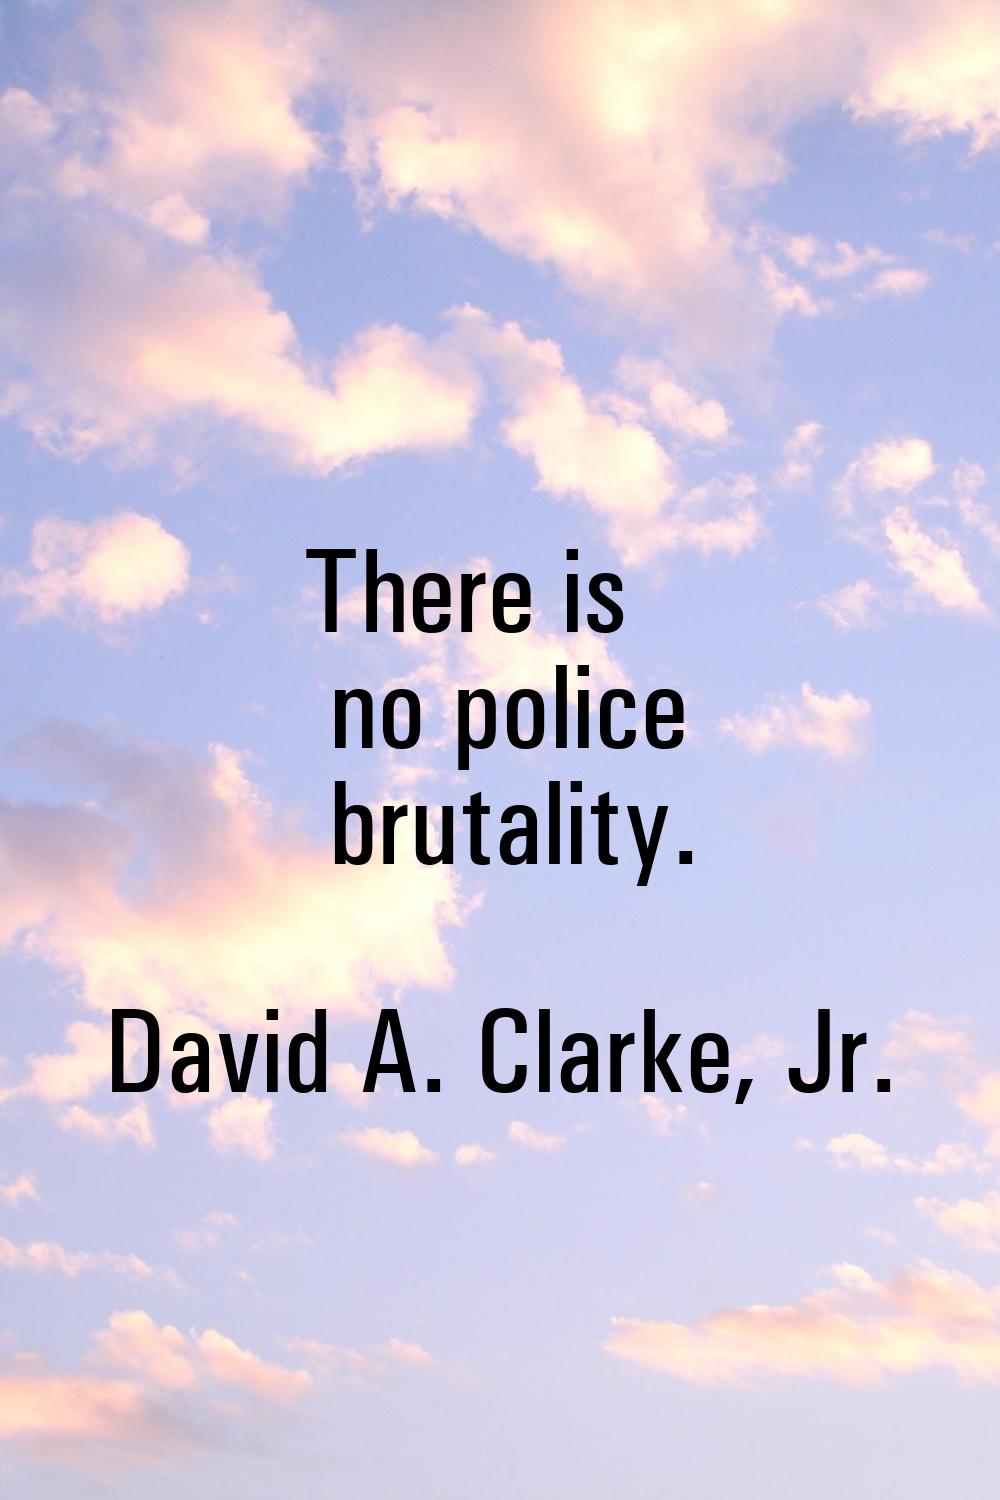 There is no police brutality.